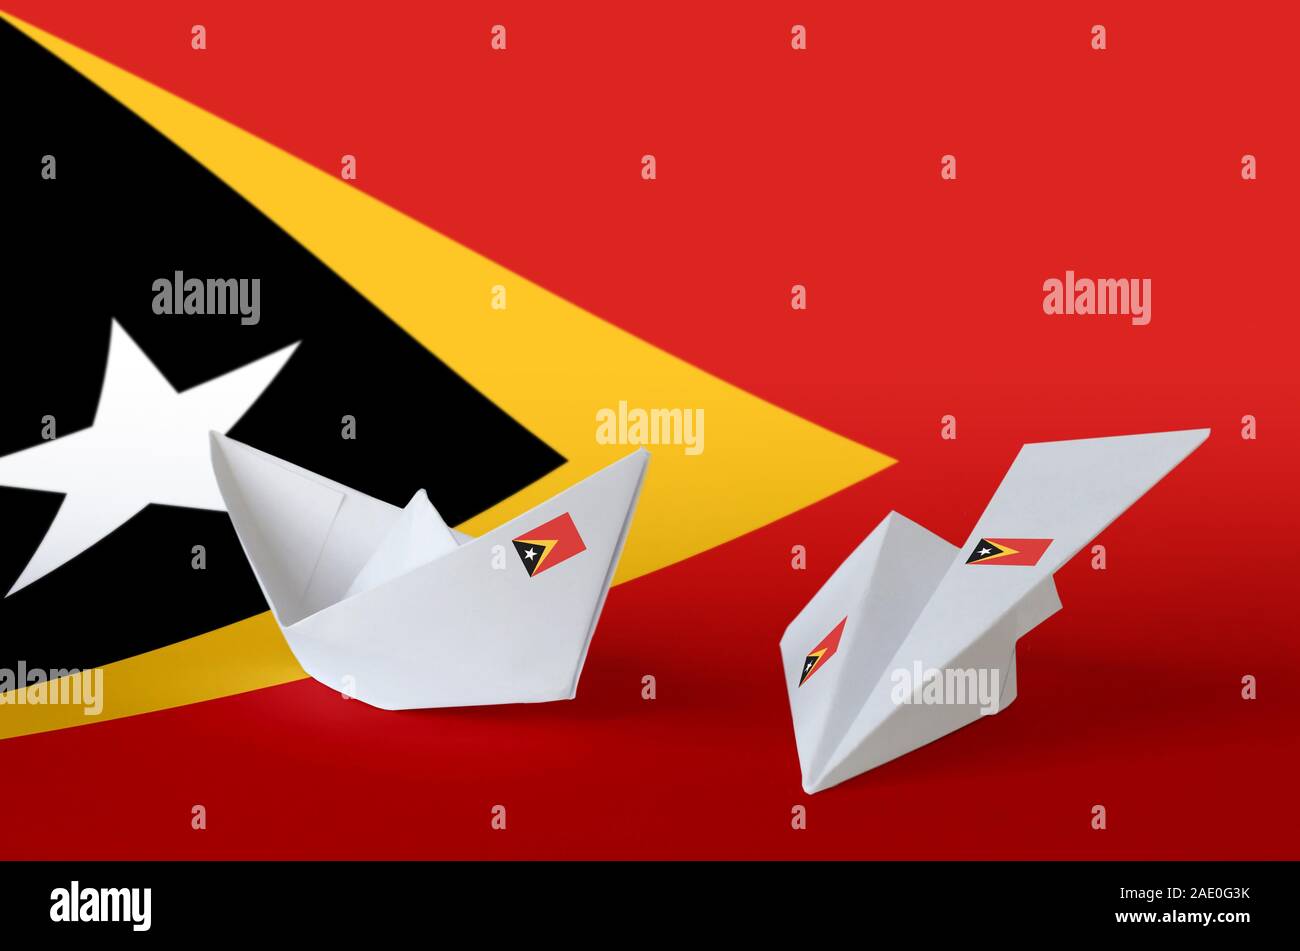 Timor Leste flag depicted on paper origami airplane and boat. Oriental handmade arts concept Stock Photo